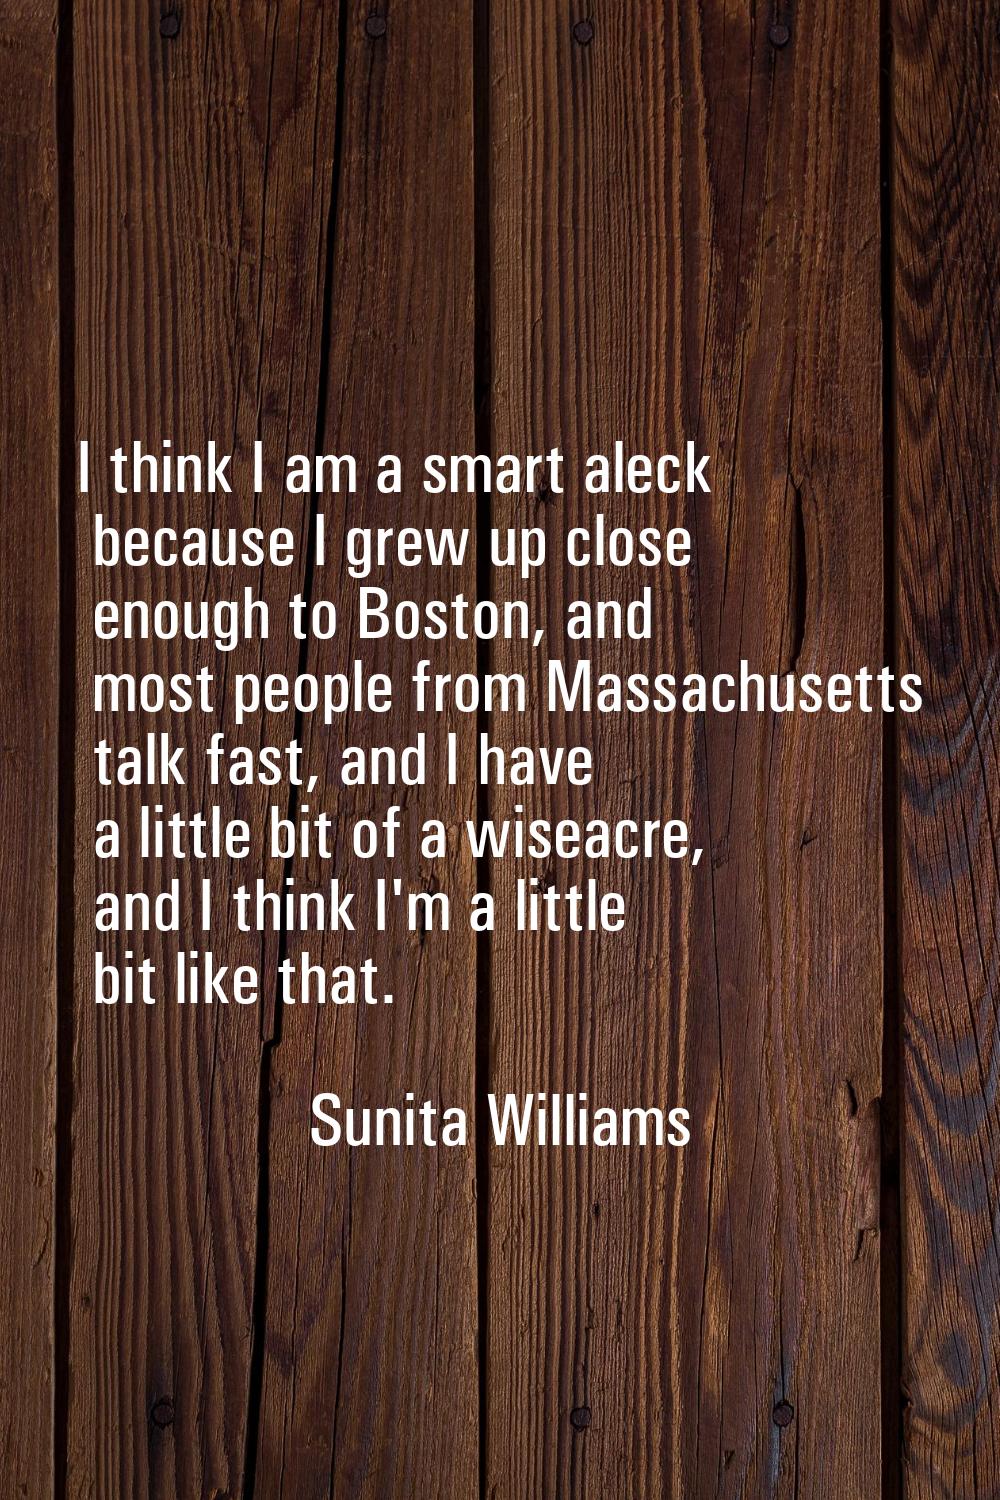 I think I am a smart aleck because I grew up close enough to Boston, and most people from Massachus